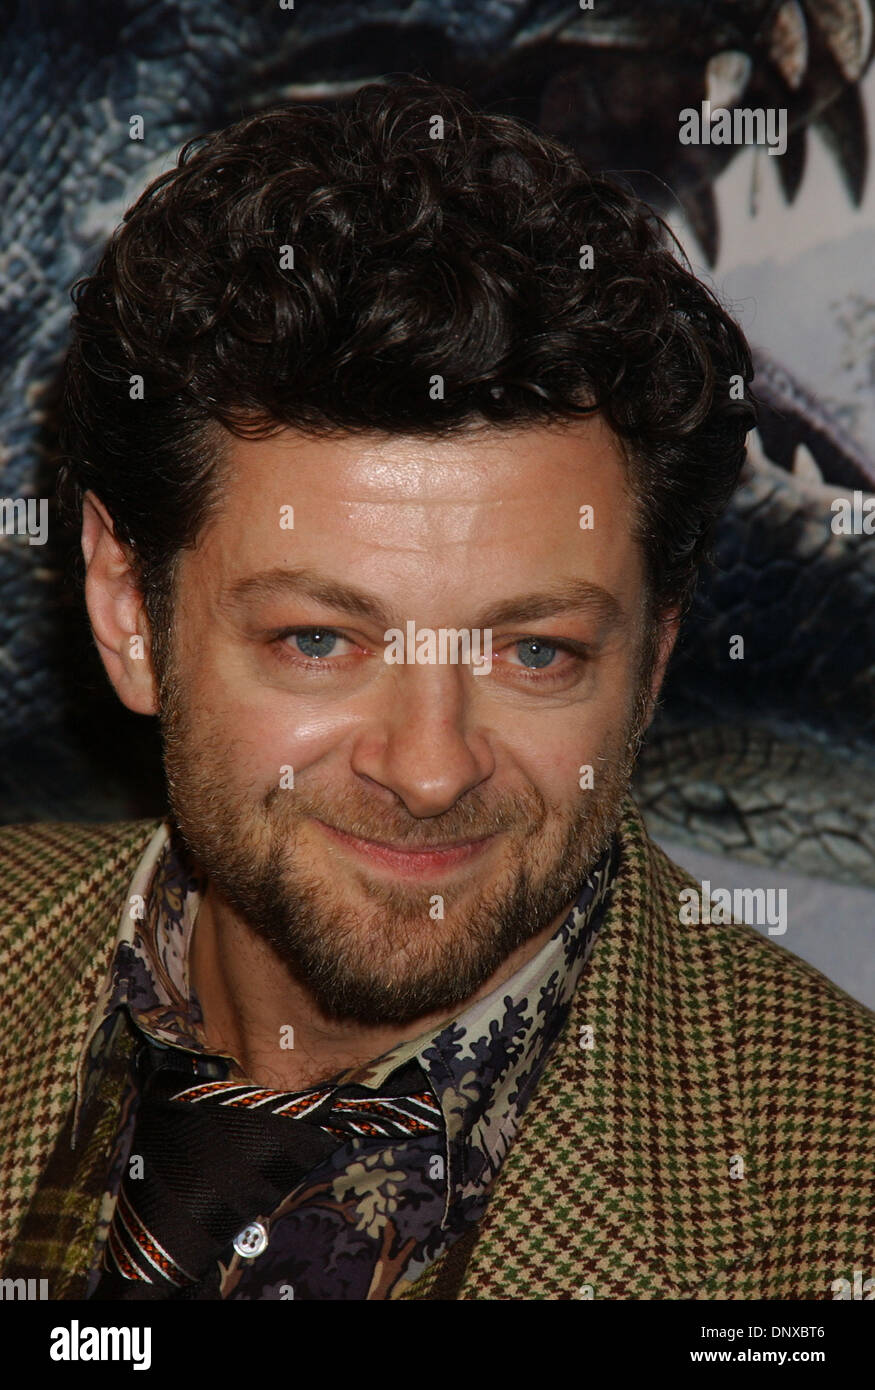 Dec 05, 2005; New York, NY, USA; ANDY SERKIS arrives at the World Premiere of 'King Kong' which took place at the 42nd St. Loews E-Wok Theater. Mandatory Credit: Photo by Dan Herrick/KPA/ZUMA Press. (©) Copyright 2006 by Dan Herrick Stock Photo